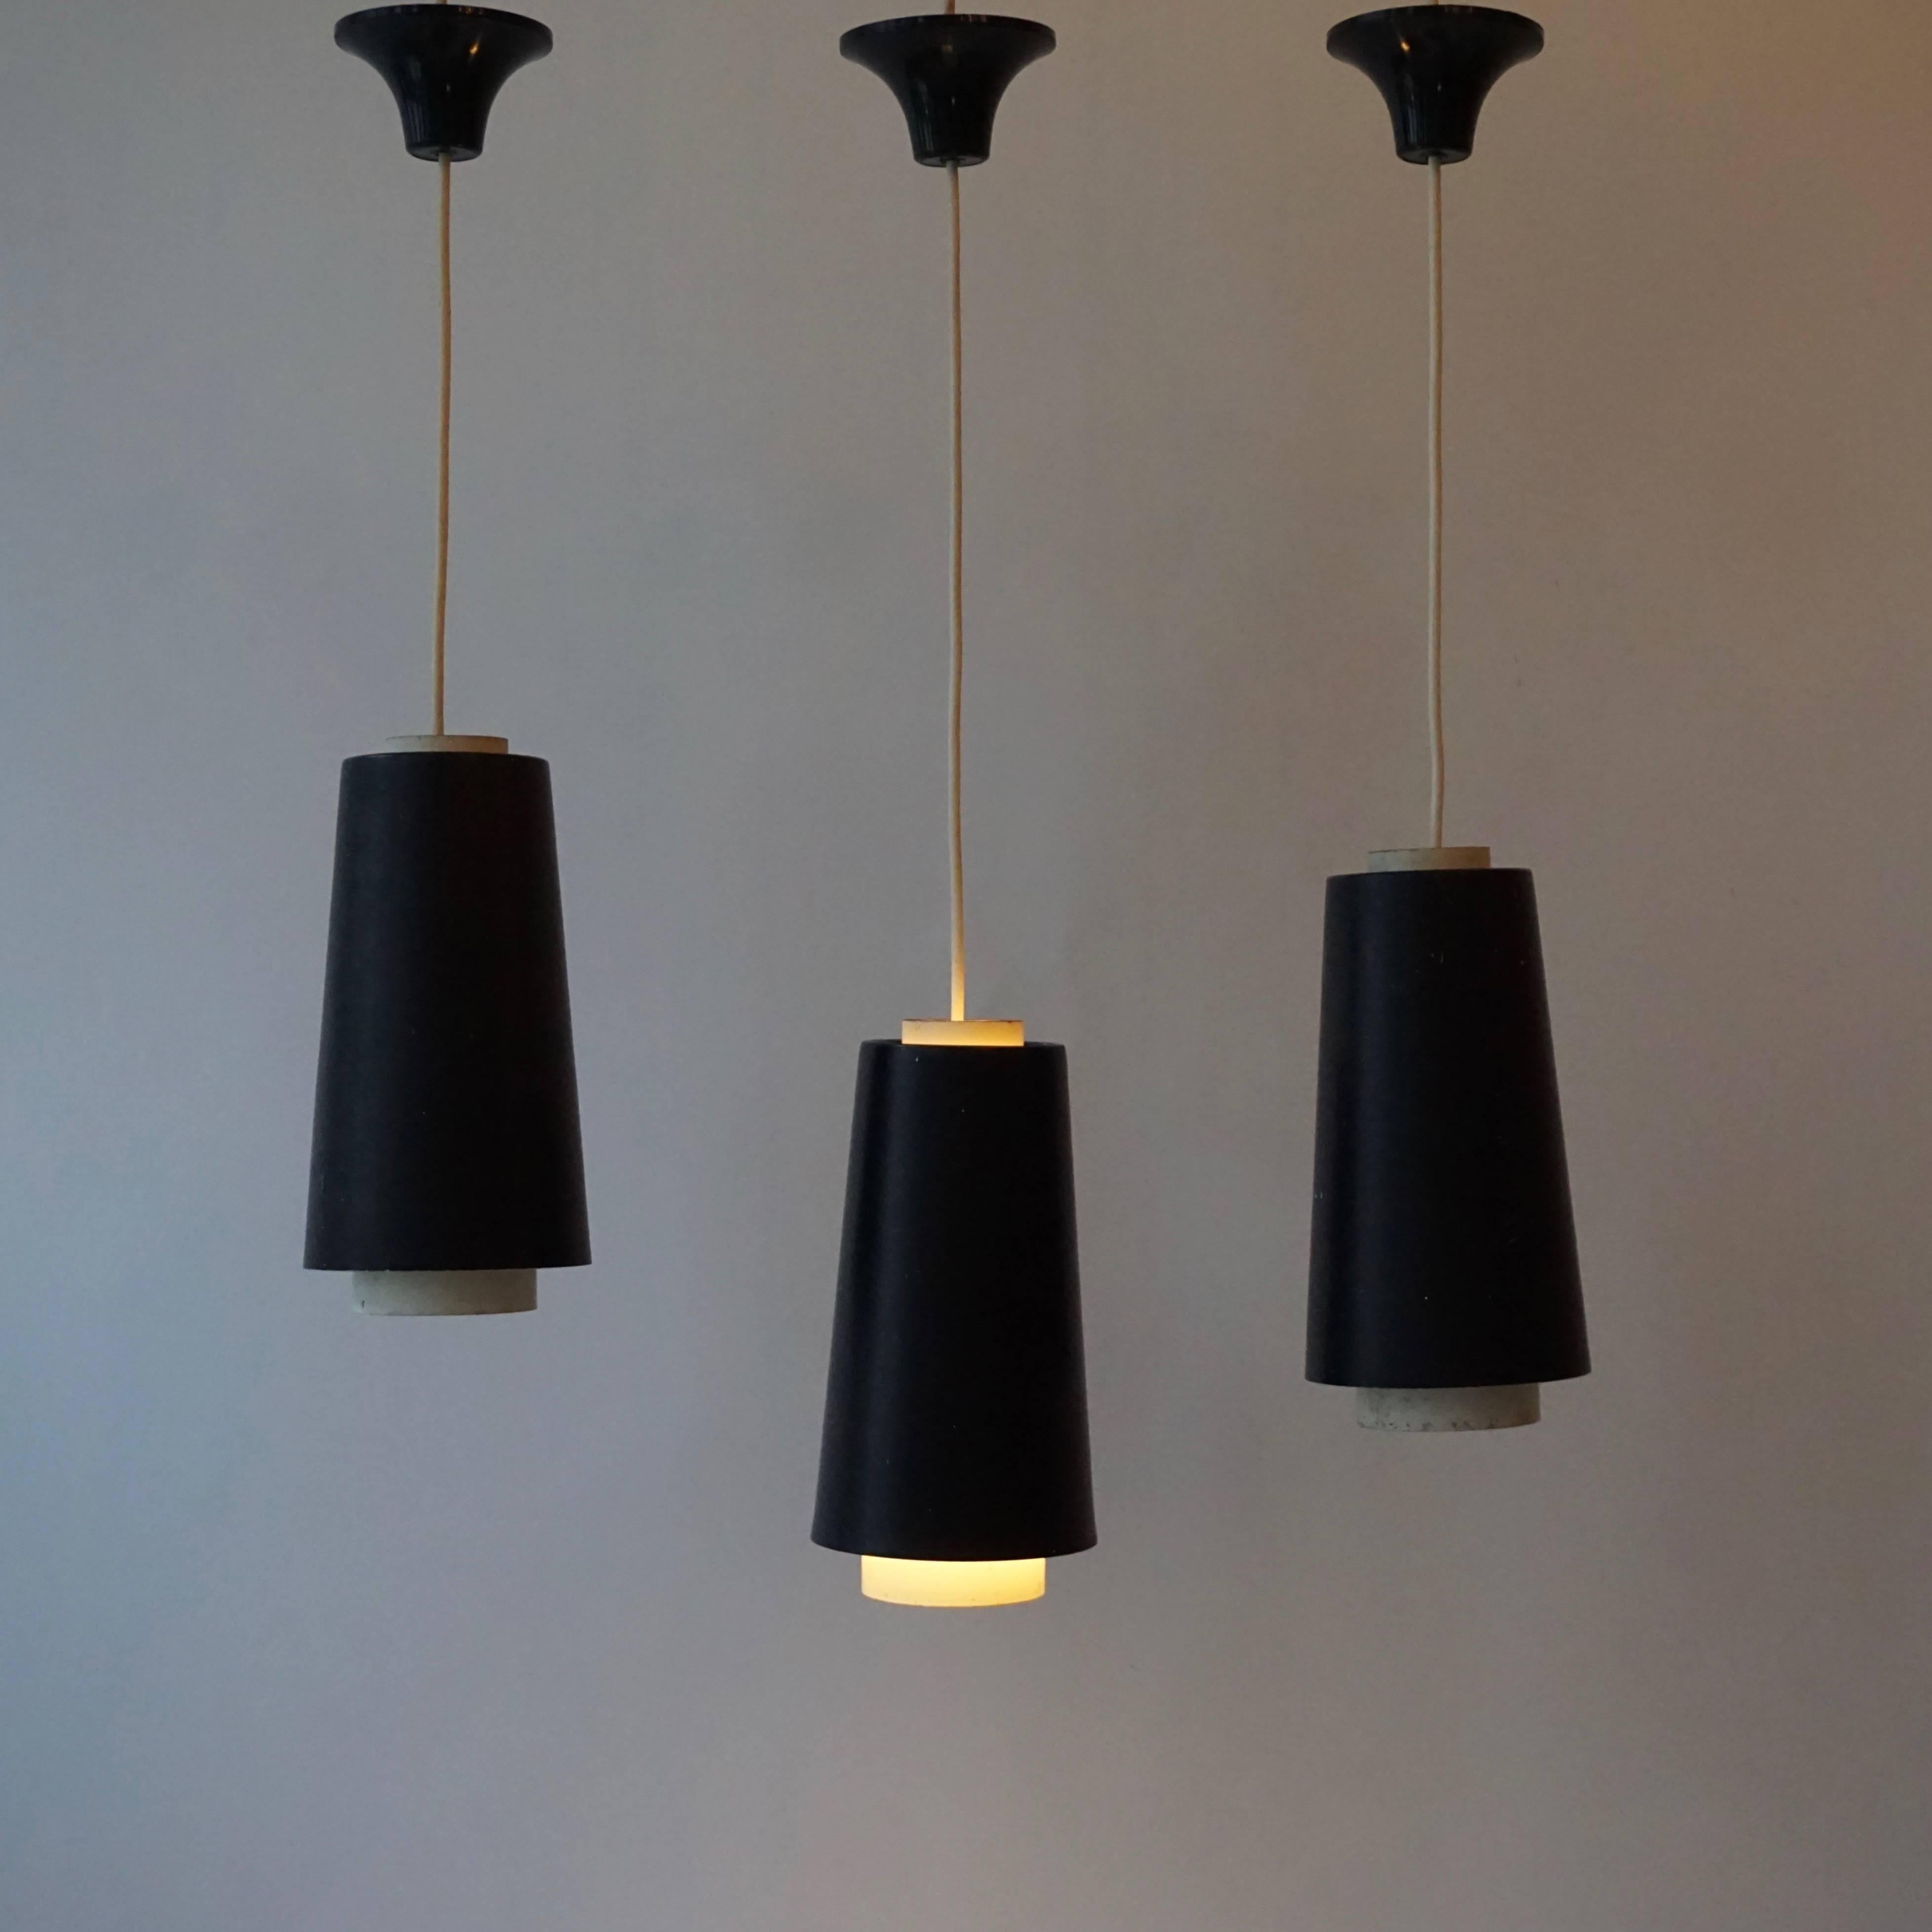 Set off three metal 1950s pendant lights.
Please note that price is per item not for the set.
